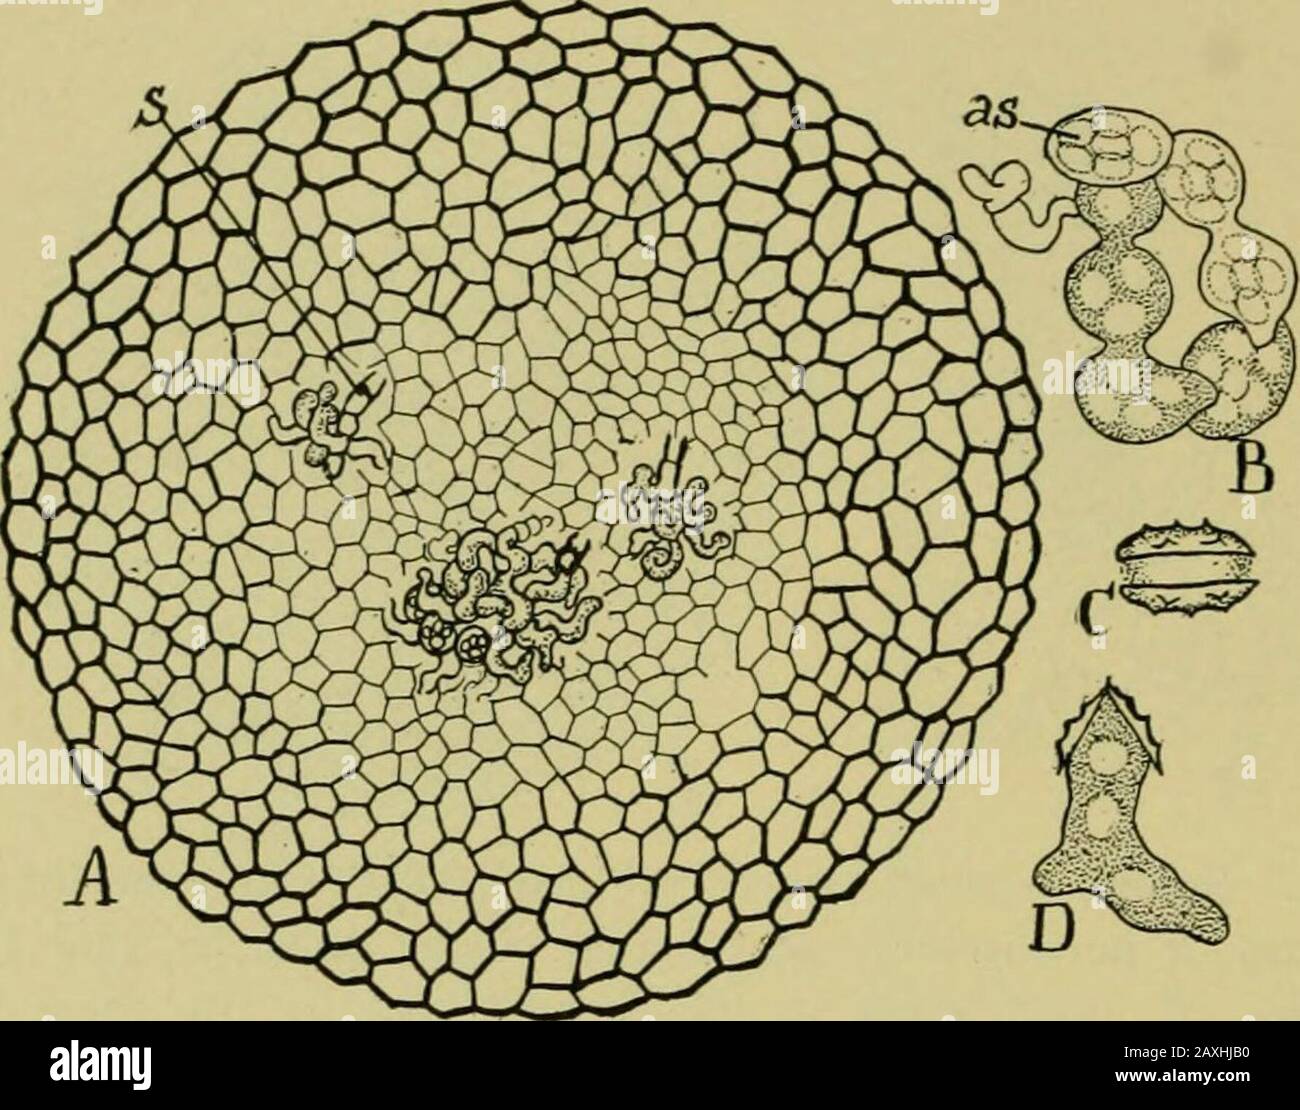 Nature and development of plants . 143, B, C), thus forming a solidbody, known as the ascocarp or perithecium (plu. perithecia), thatappears to the eye as a minute grain of sand. During this growthnumerous lateral branches arise on the hyphae derived from thegametospore and become transformed into asci as shown in Fig.144, A, B. The ascocarps finally decay and set free the asco-spores which develop a new plant or mycelium. Thus the entiresexual process, with the exception that the male gamete is notset free, is suggestive of the Rhodophyceae. The truffles are a curious group of related fungi t Stock Photo